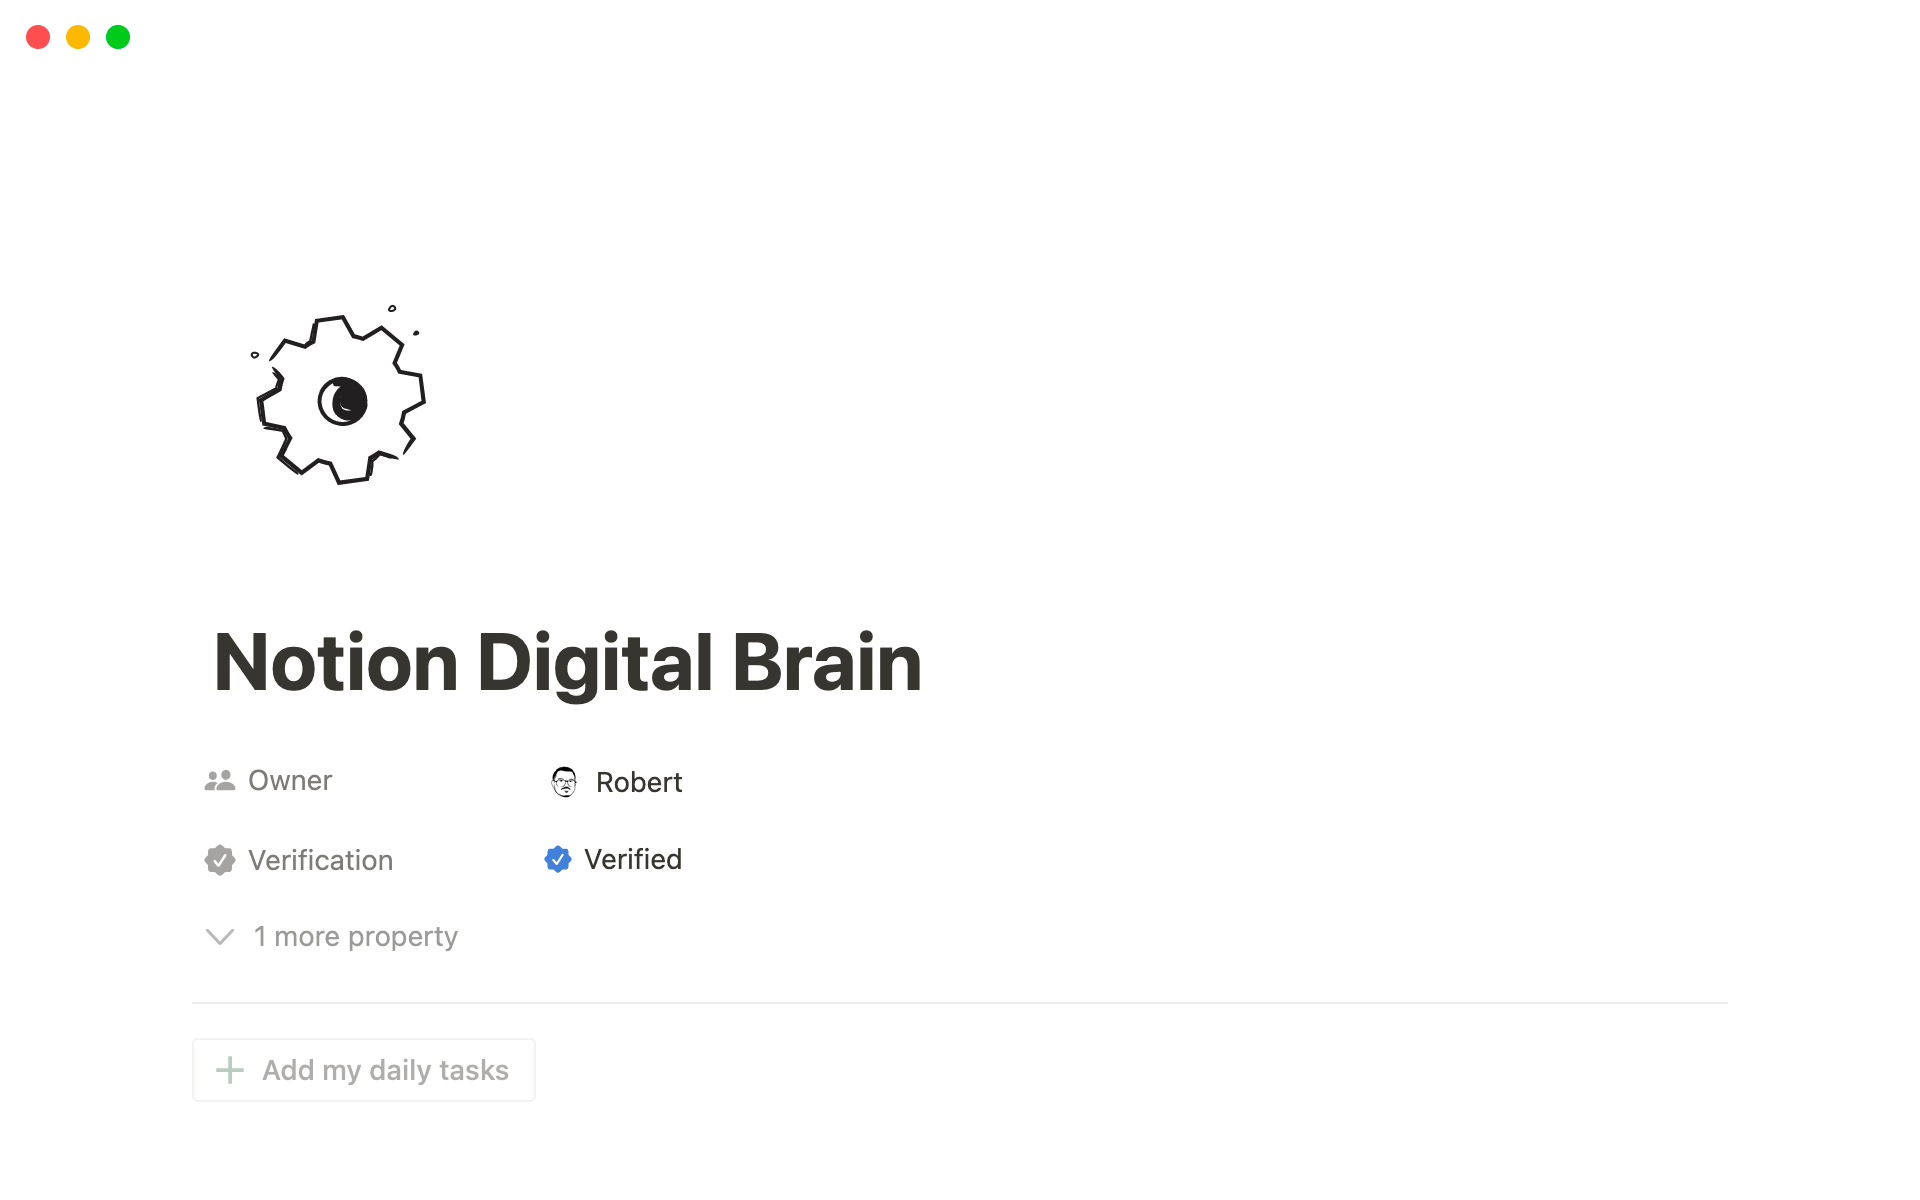 The Digital Brain Notion template is an all-in-one solution to help you stay organized and focused on your goals.